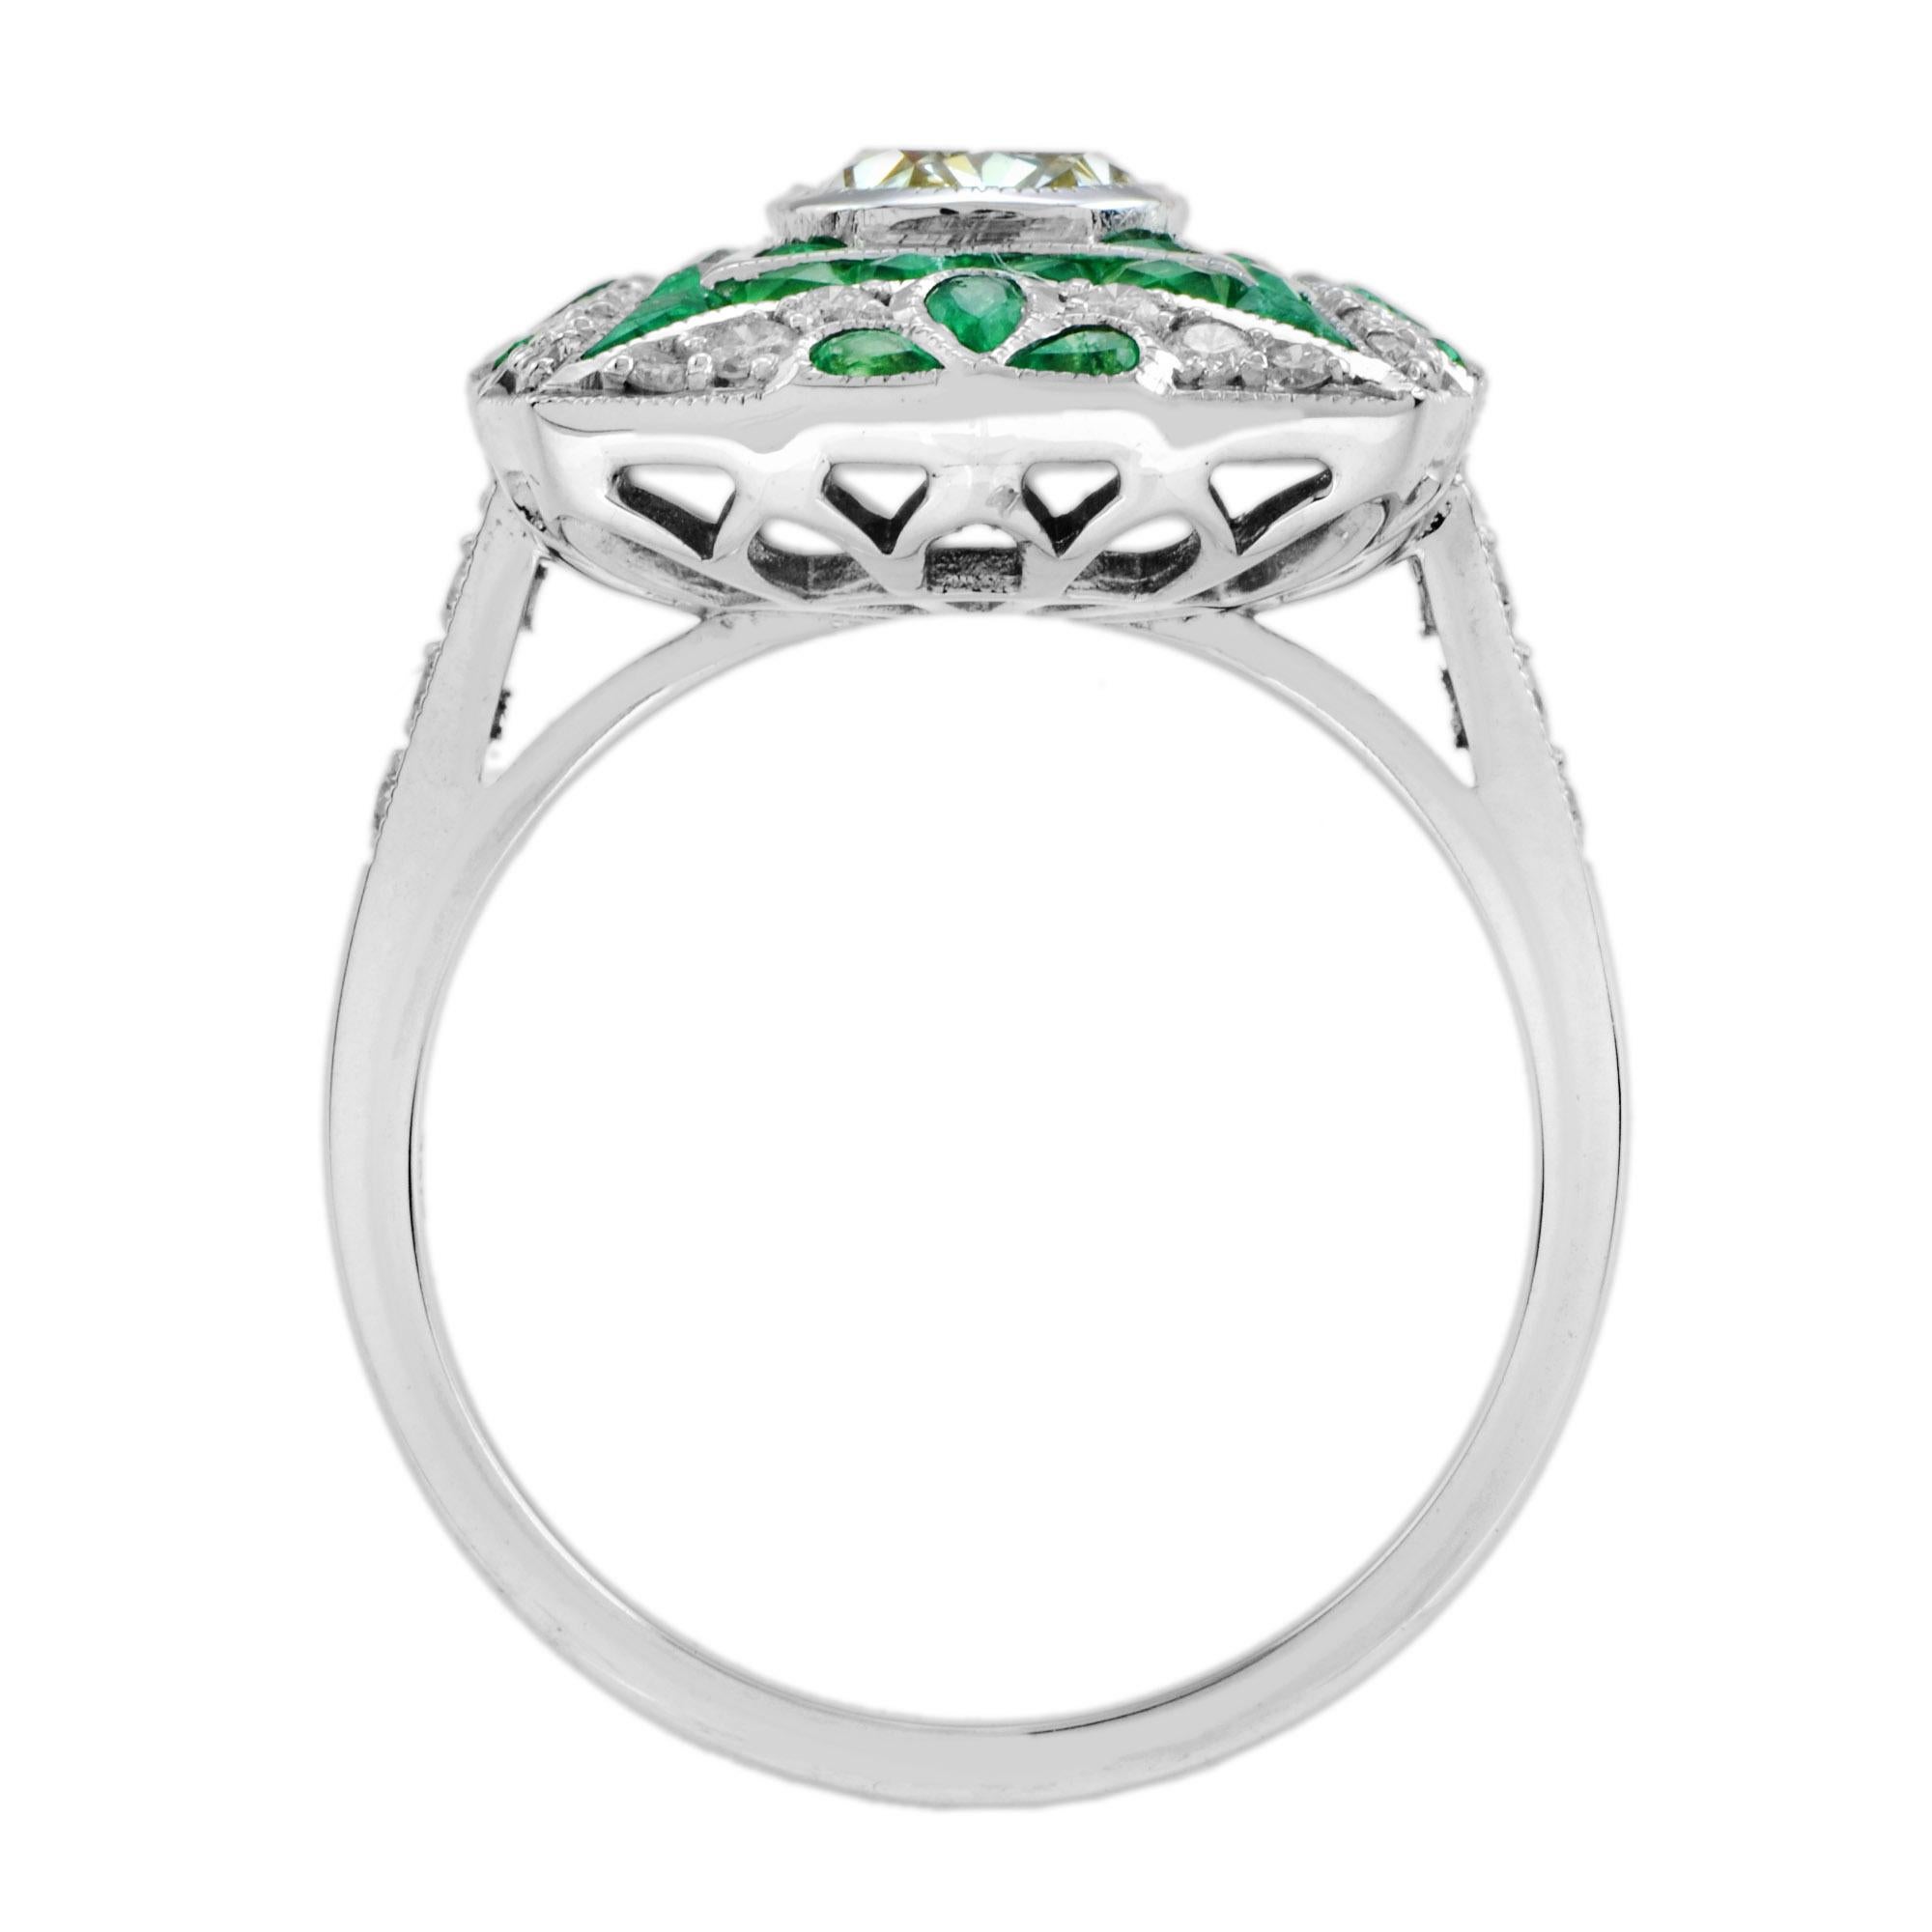 Certified Diamond and Emerald Art Deco Style Engagement Ring in 18k White Gold For Sale 1